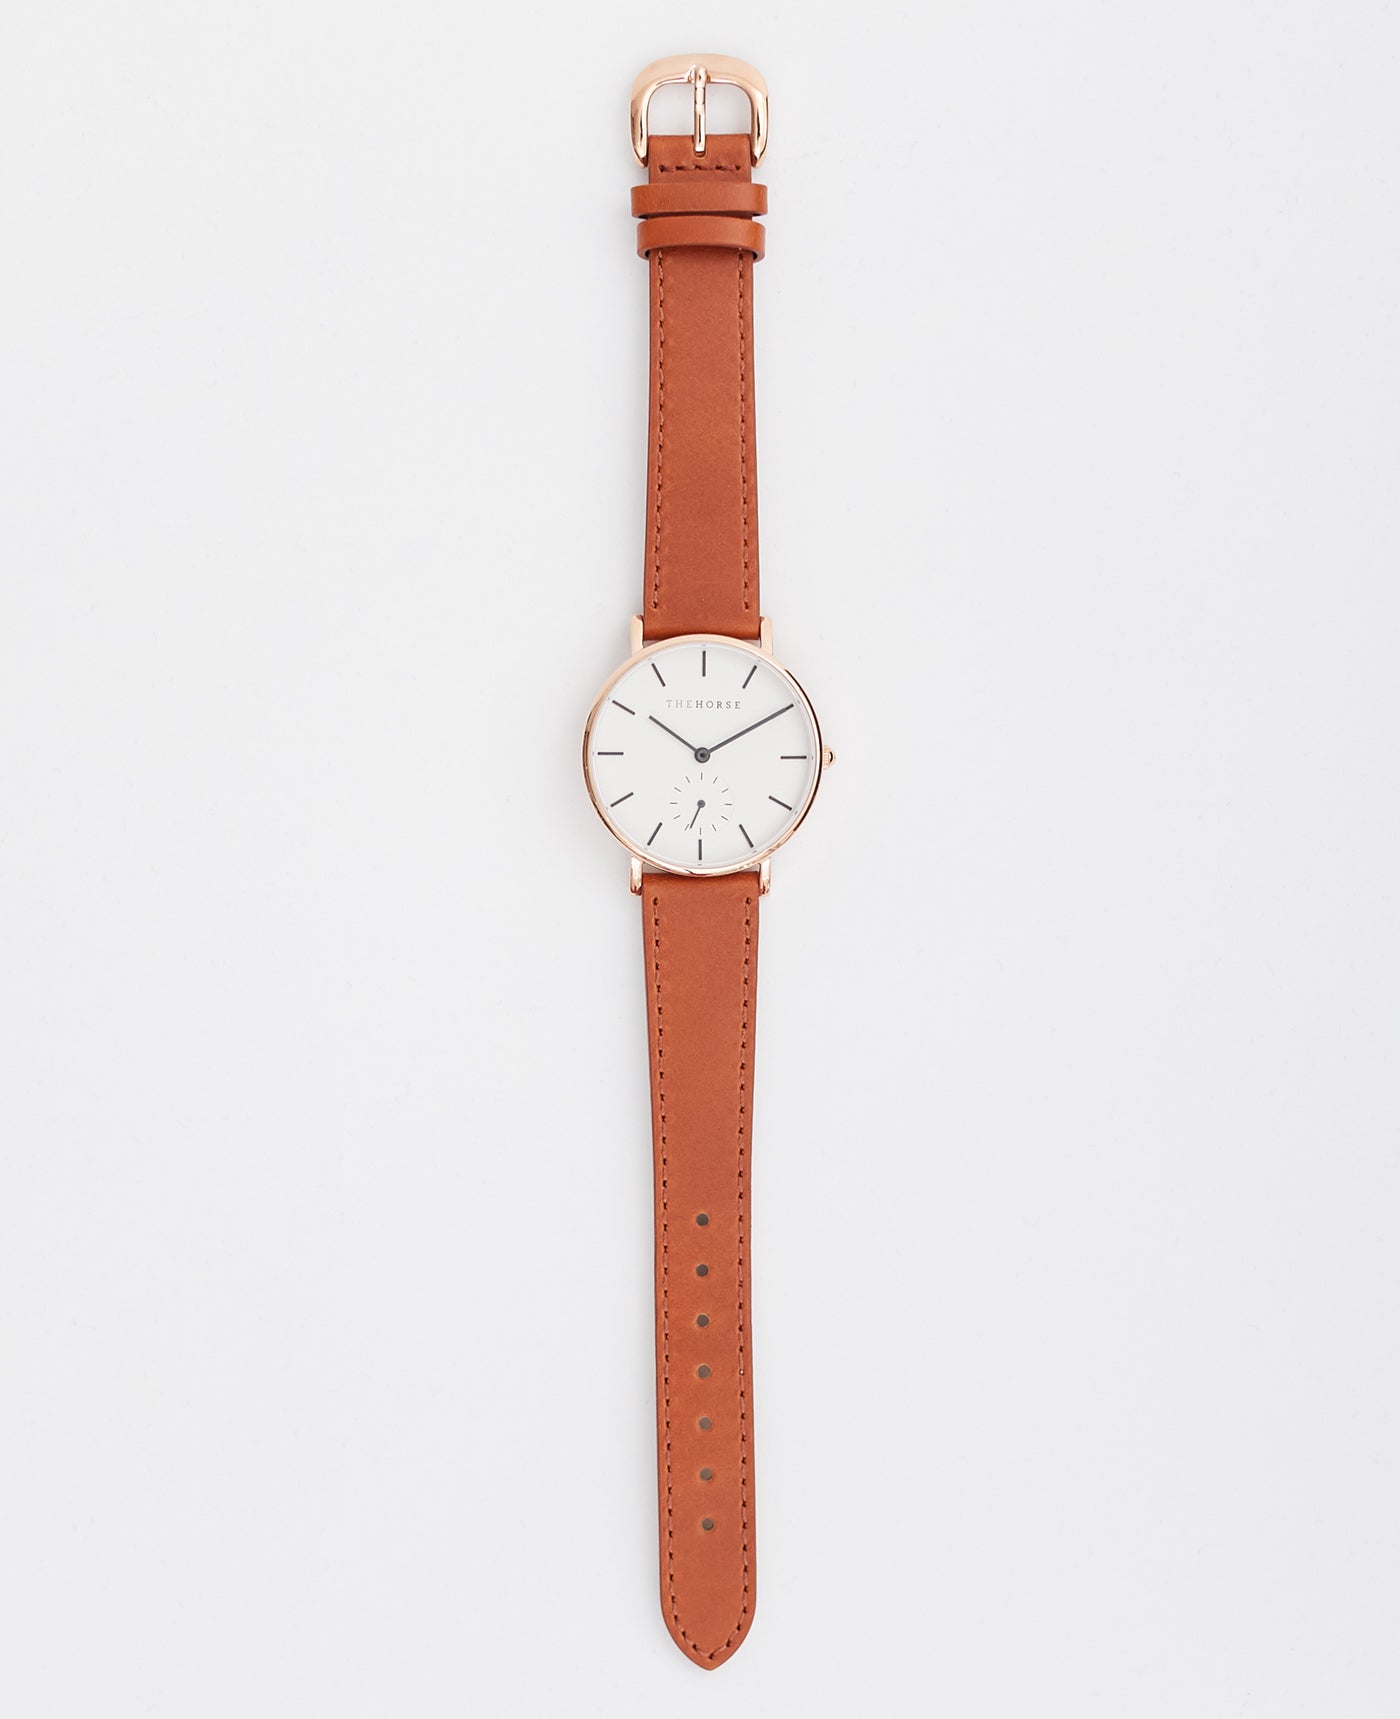 The Classic Watch in Rose Gold Case / White Dial / Walnut Leather Strap by The Horse